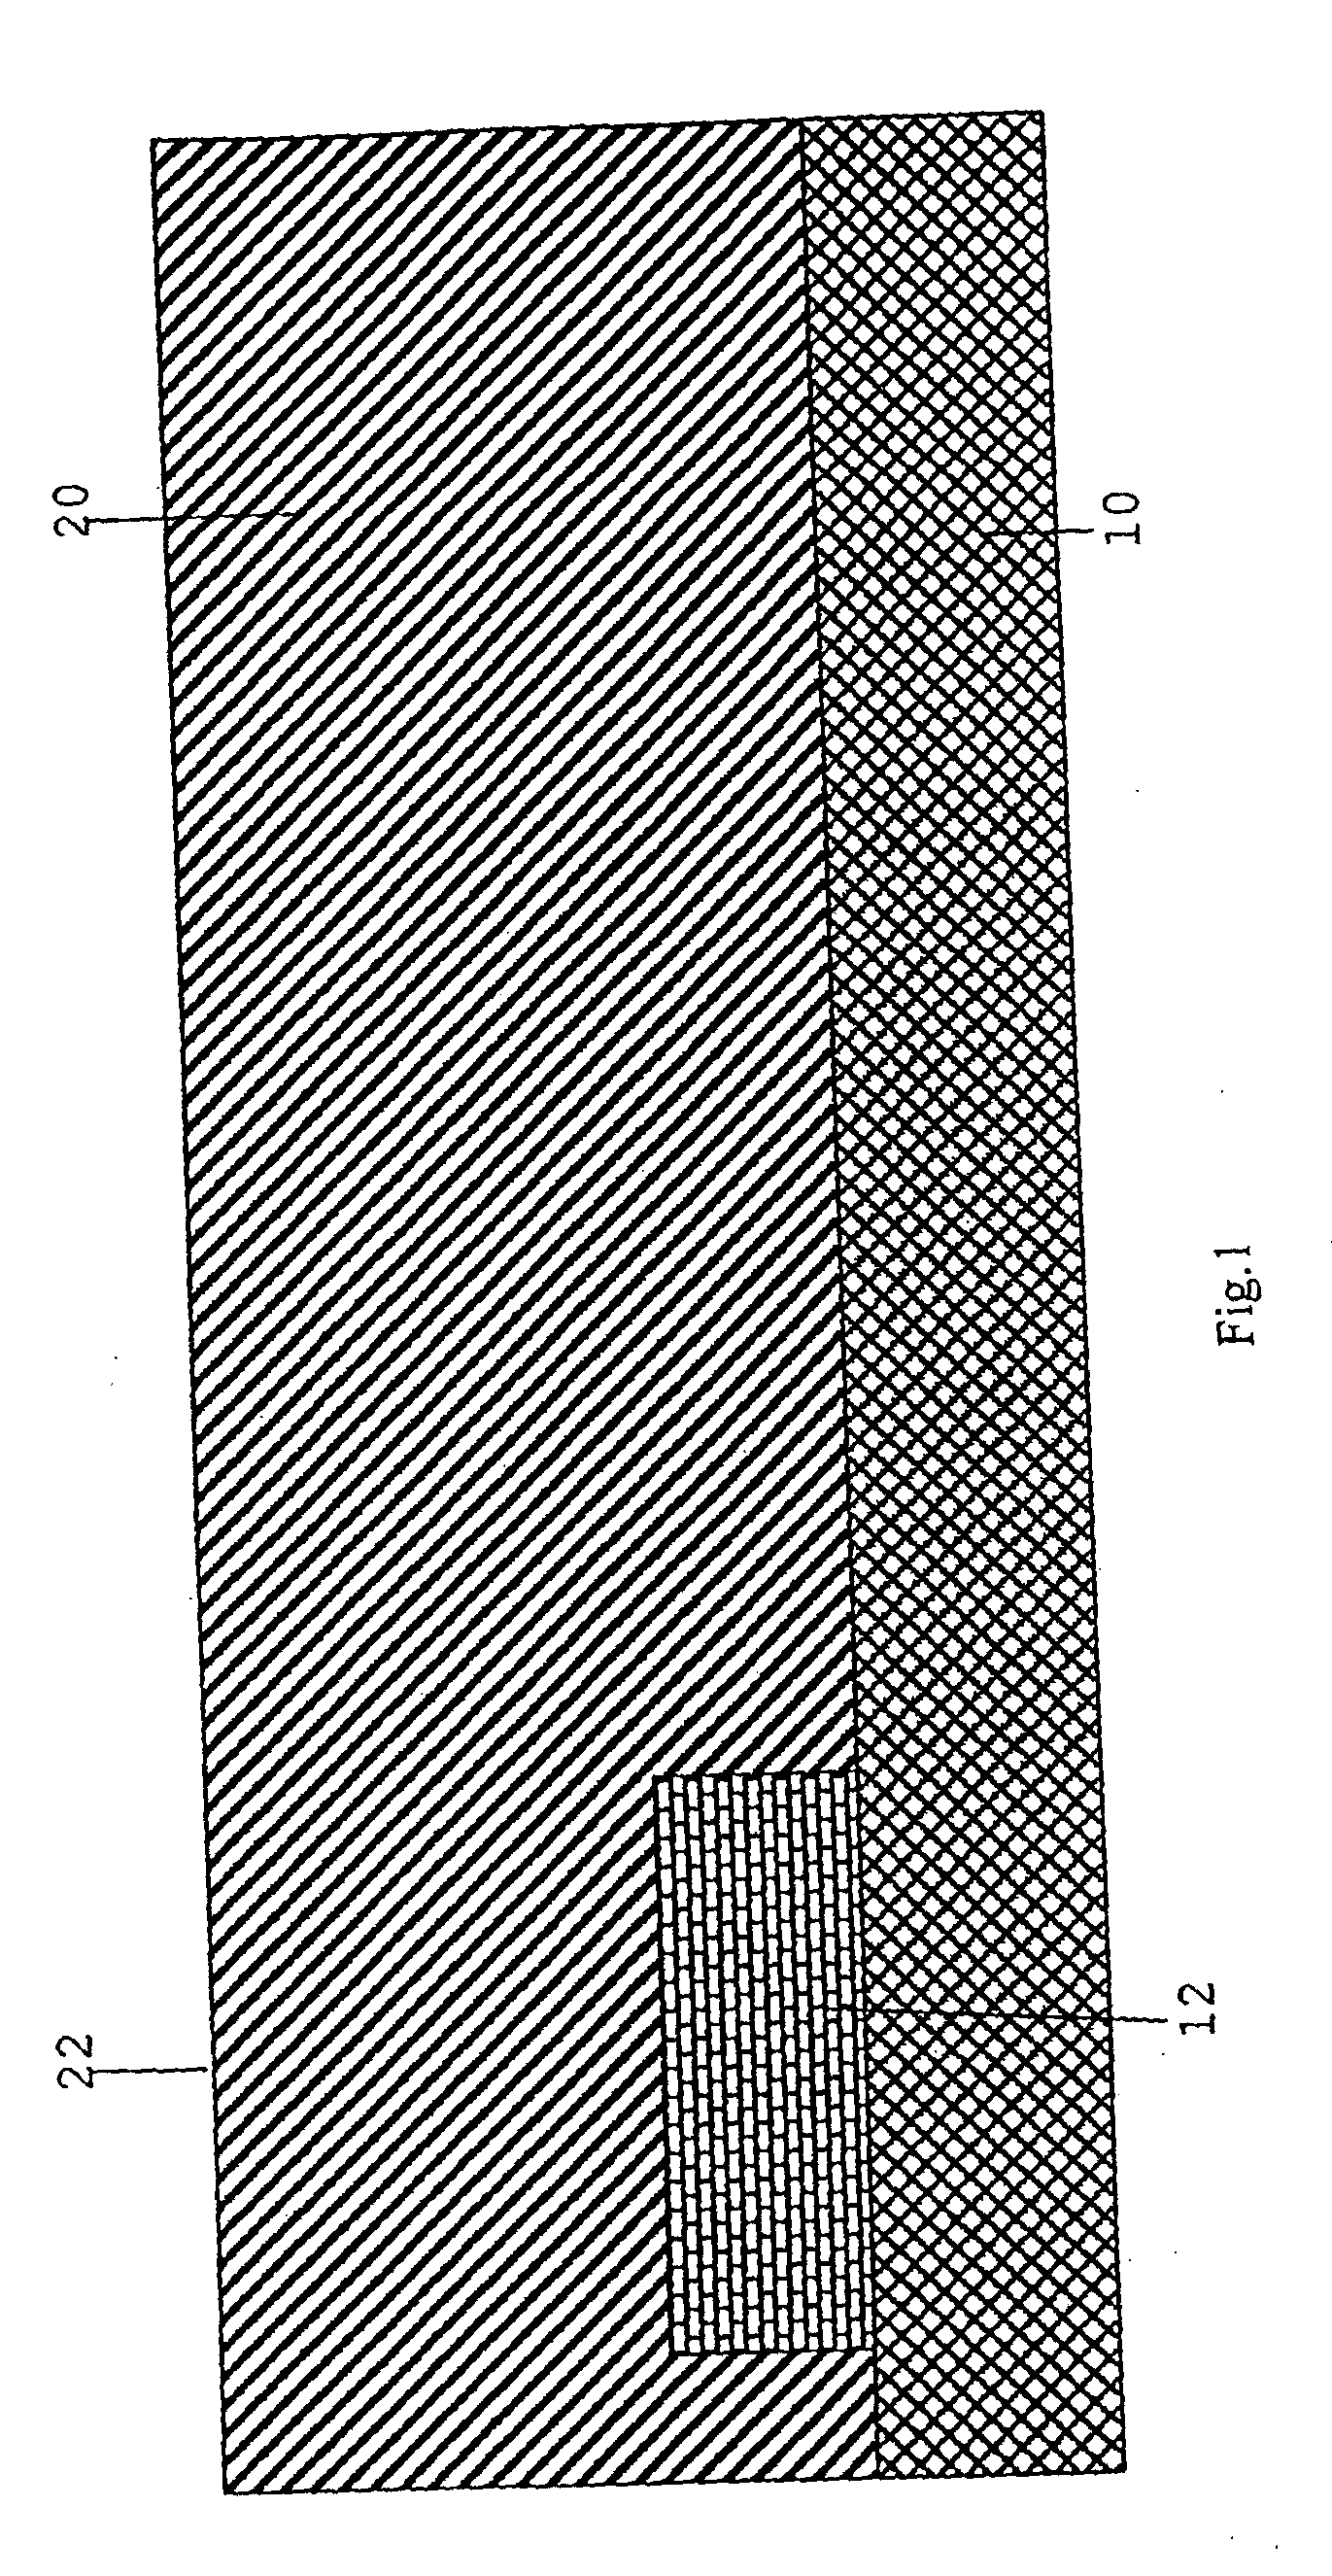 Method of producing a capacitor in a dielectric layer